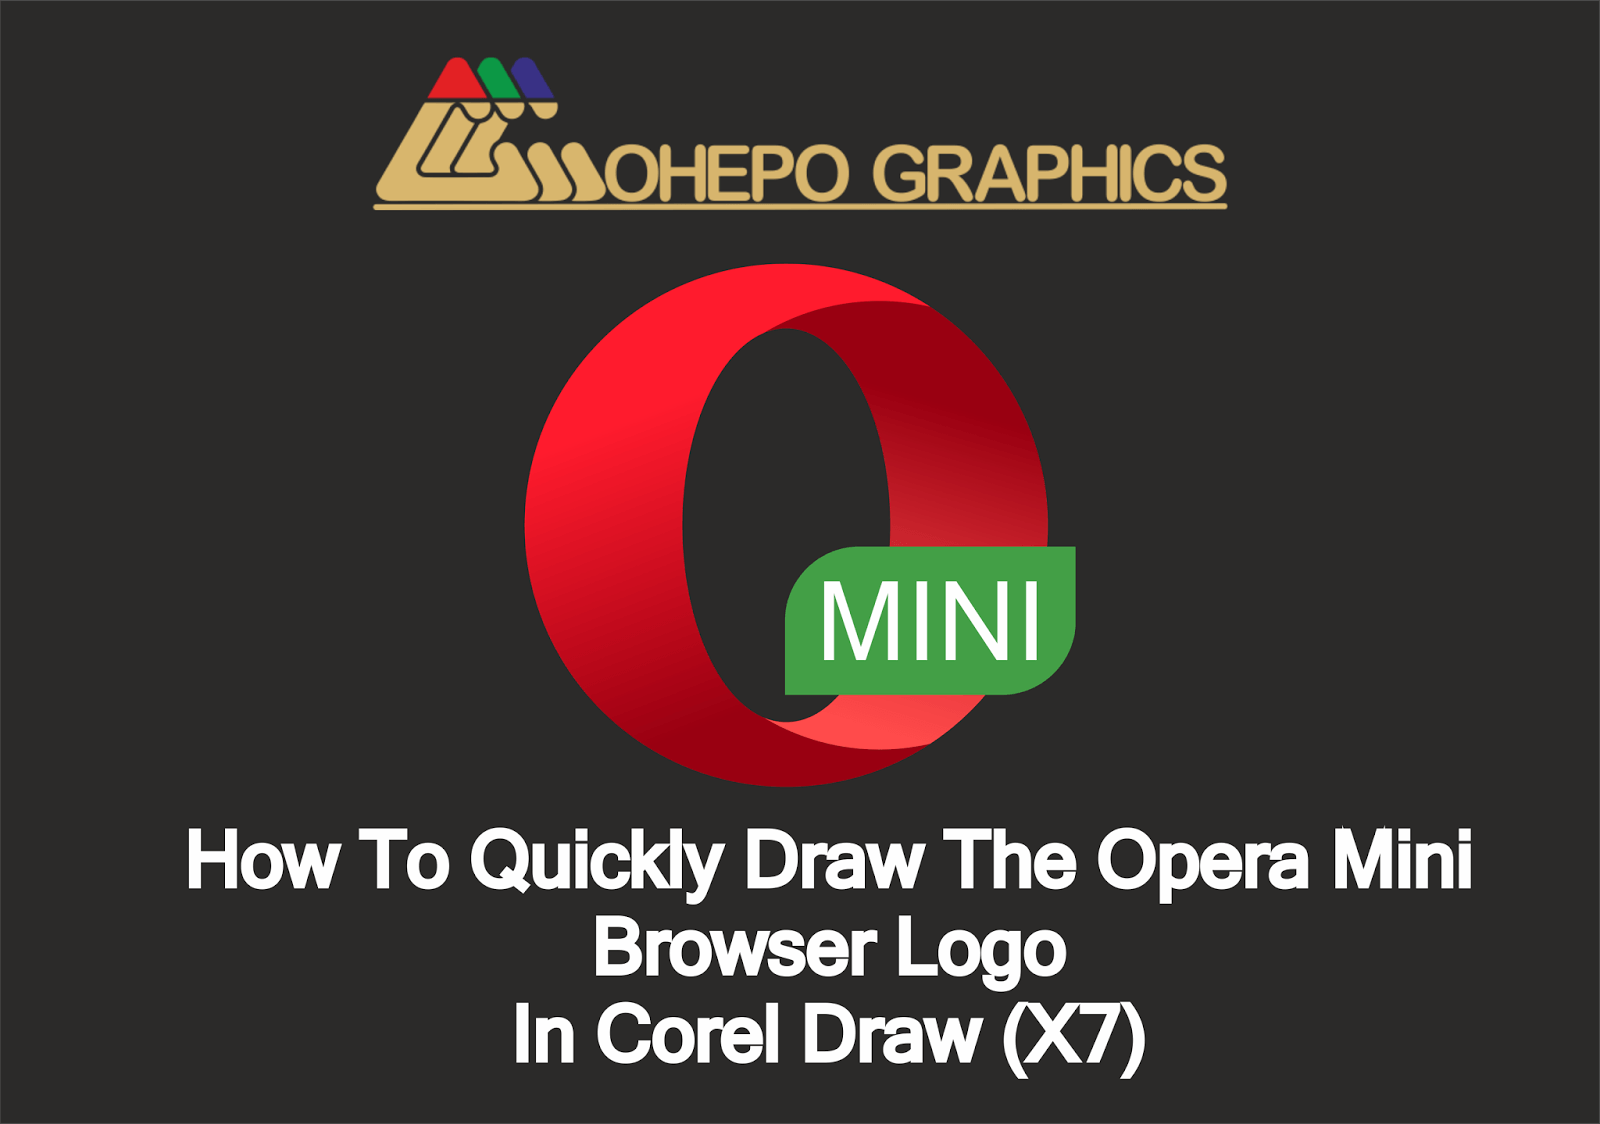 X7 Logo - How To Quickly Draw The Opera Mini Browser Logo In Corel Draw X7